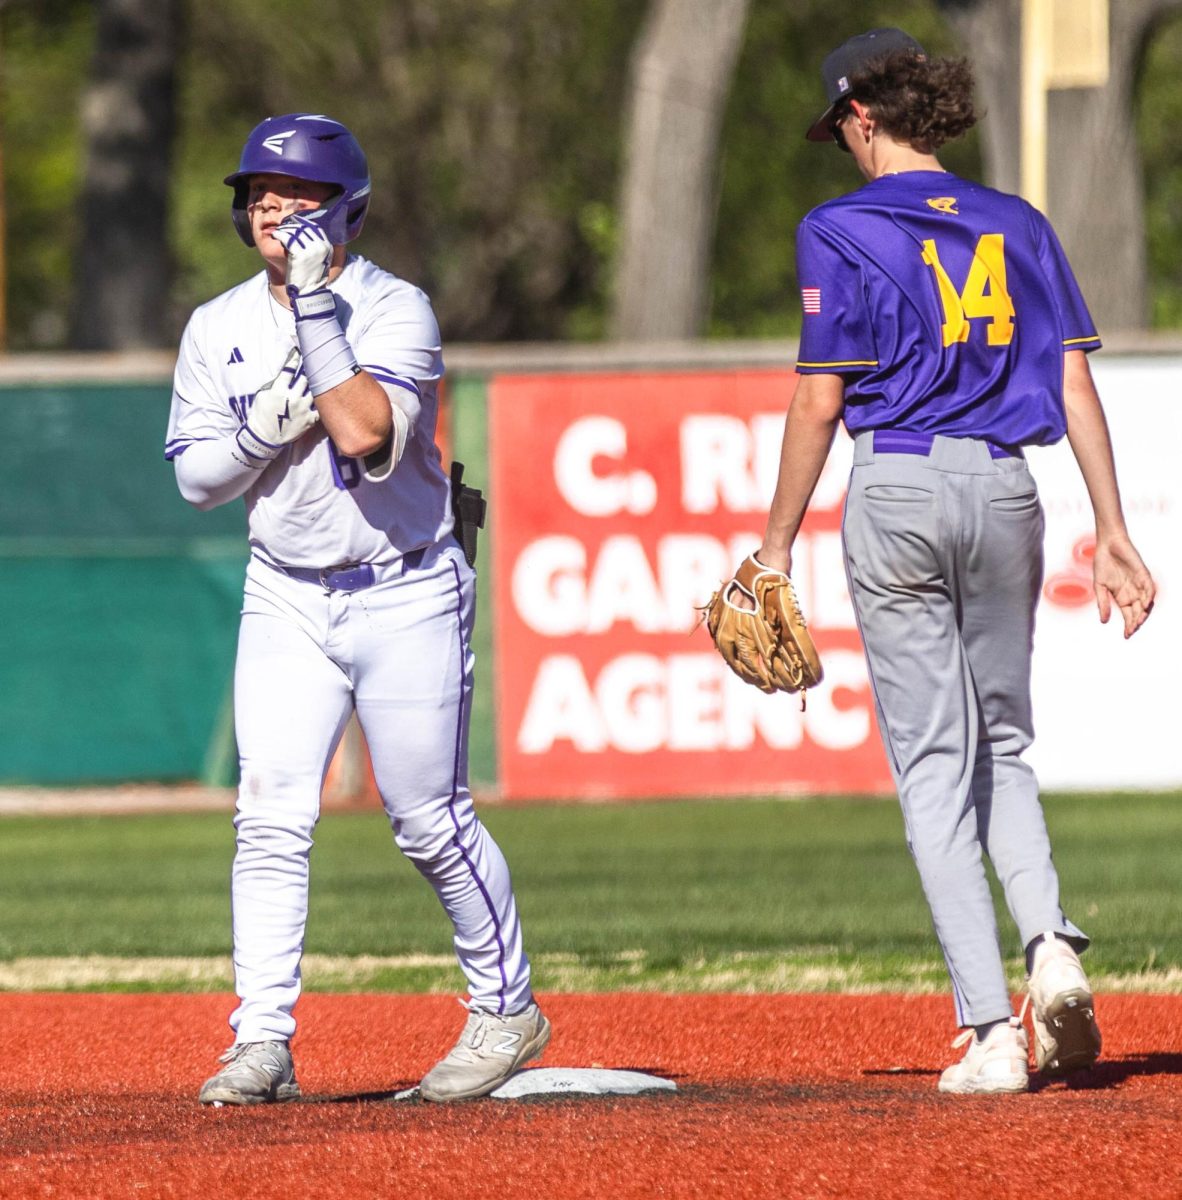 After successfully sliding into second base and beating the throw from the outfield, senior Tucker Akins calls time to give Coach Dwayne Vaughn his batting gloves. 